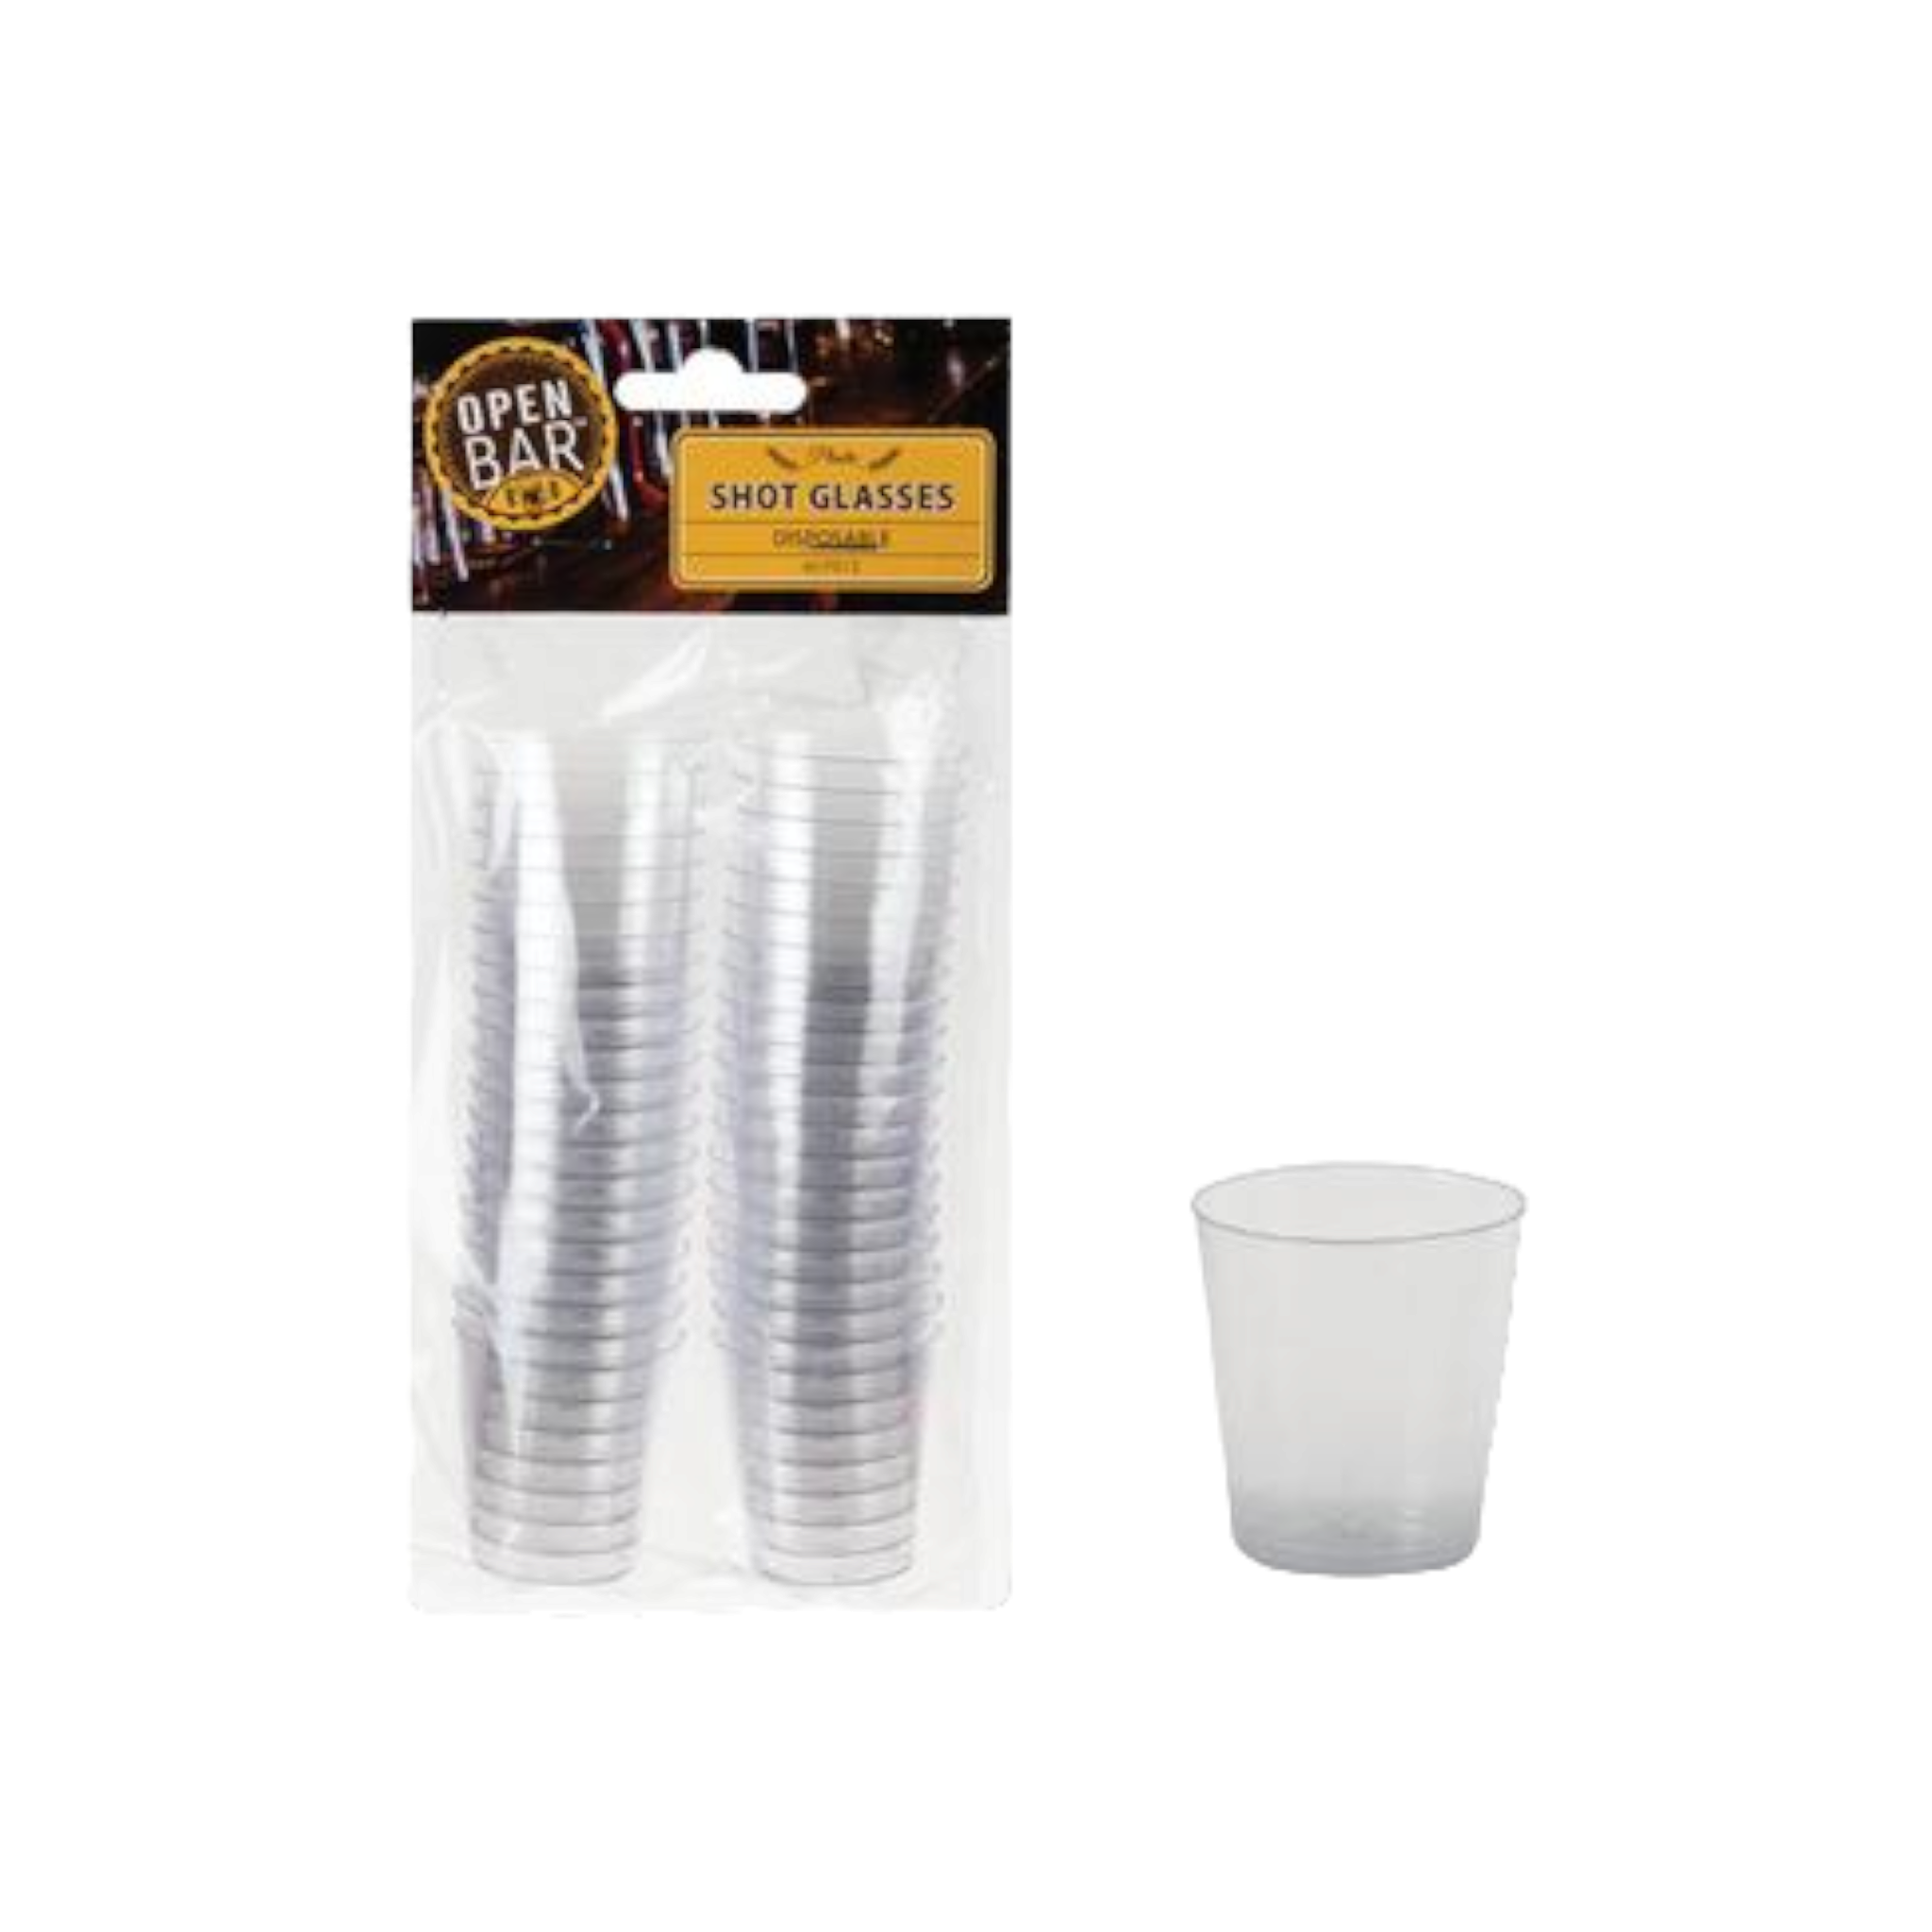 Disposable Shot Glass 30ml Shooter Tot measure 40pack